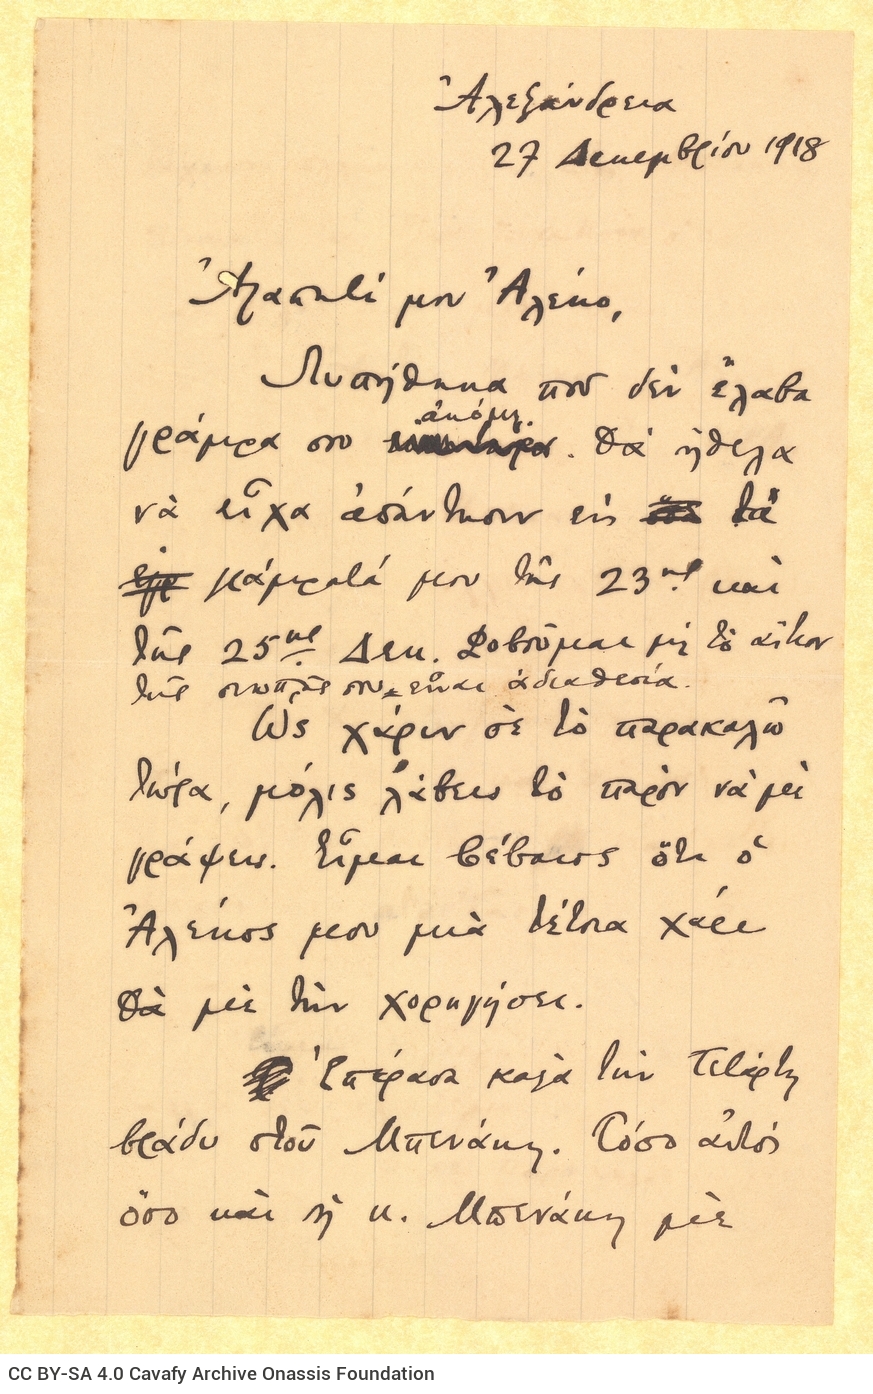 Handwritten letter by Cavafy to Alekos Singopoulo on one side of two sheets. The other side is blank. The poet refers to h